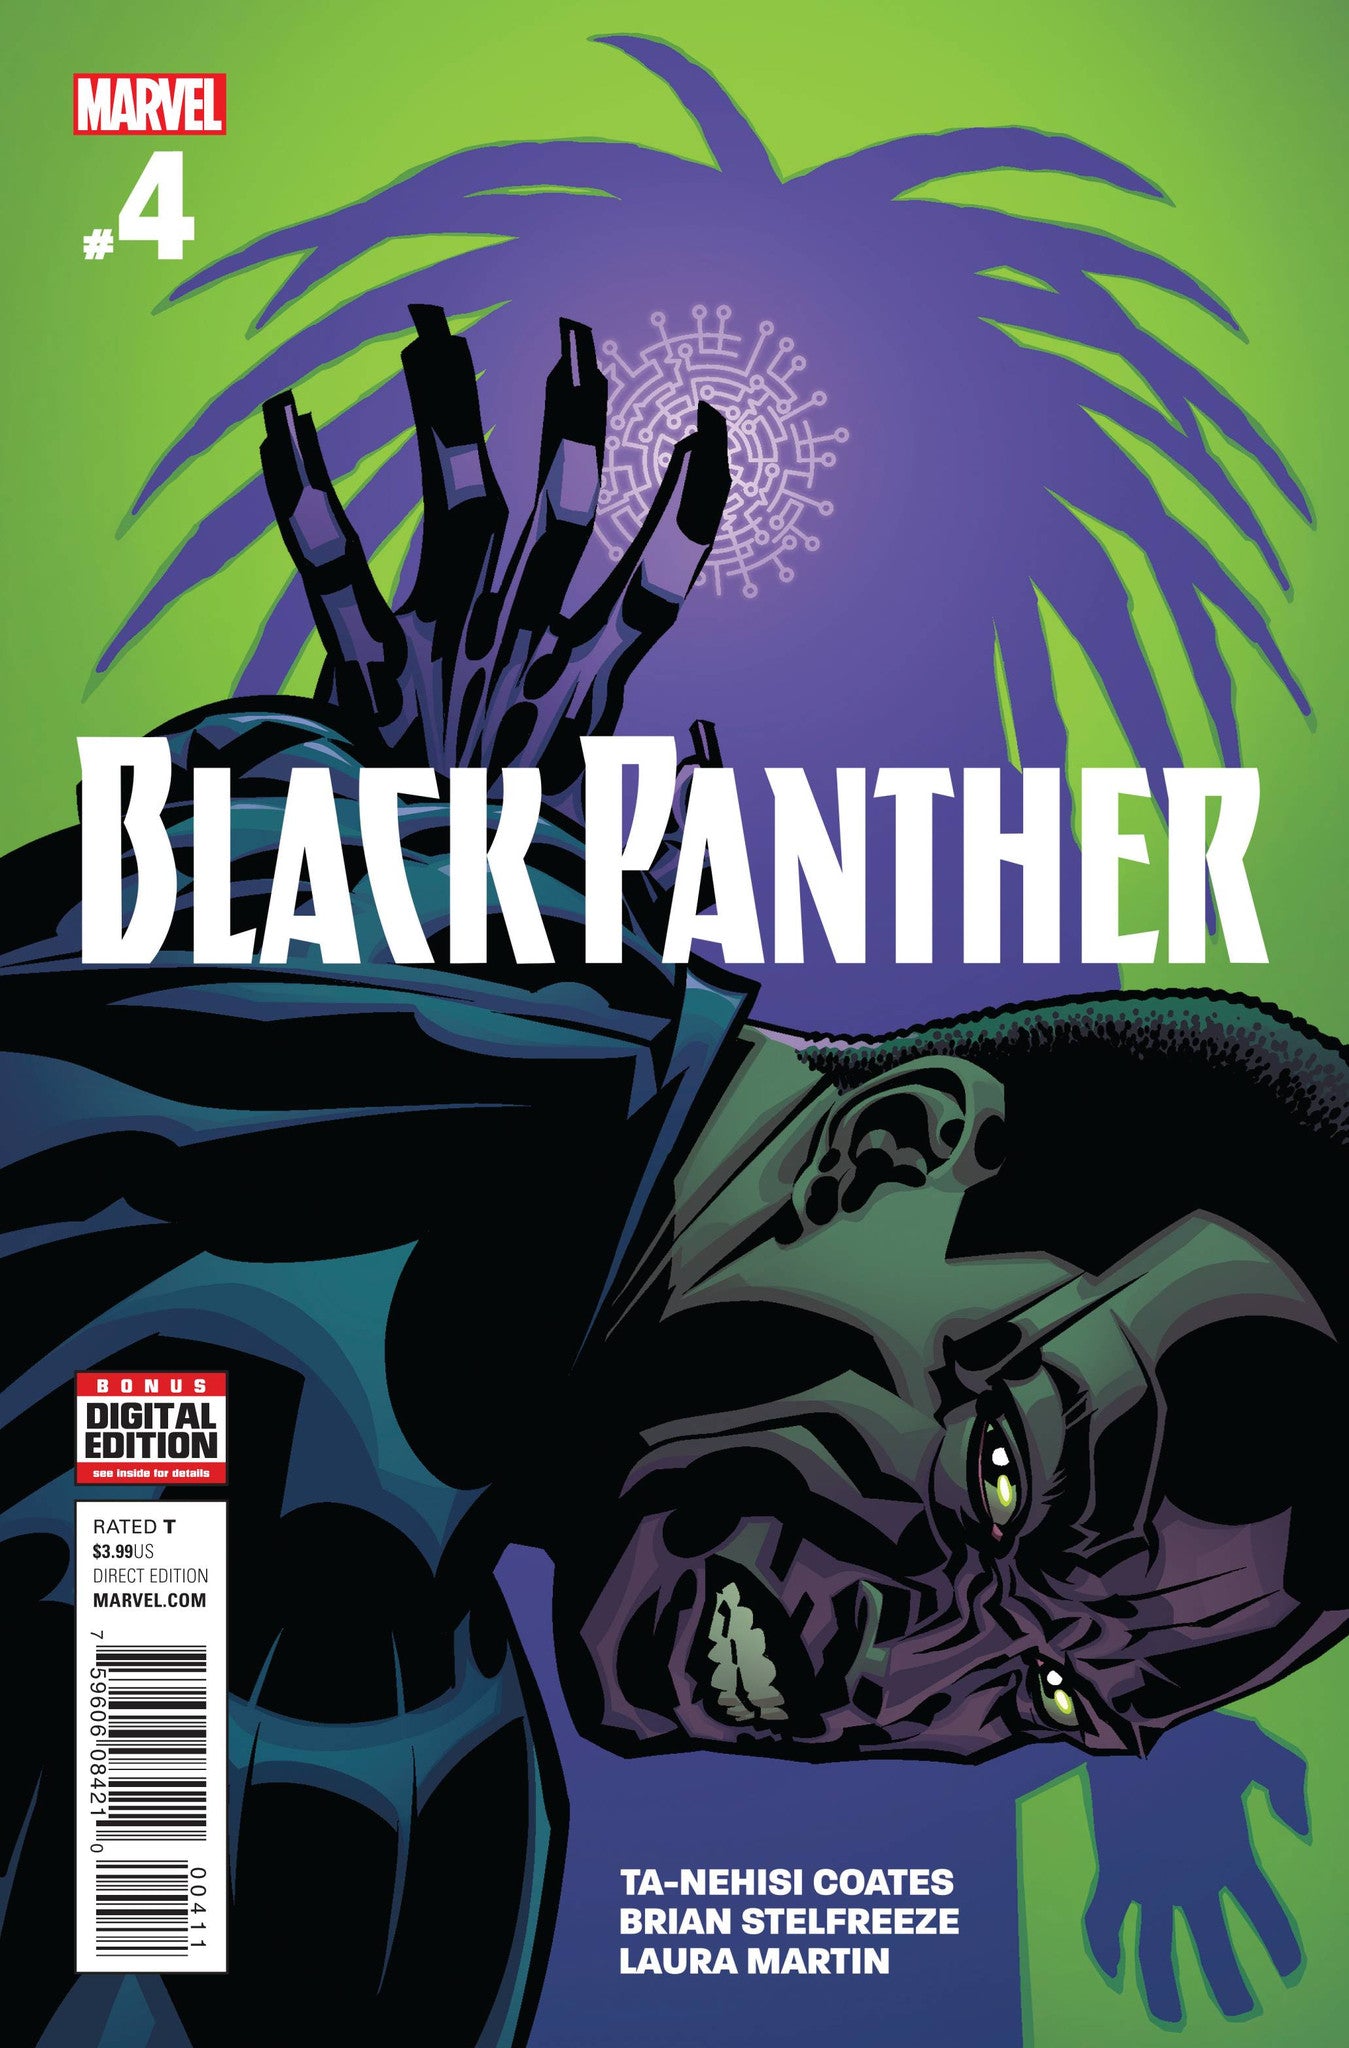 BLACK PANTHER #4 COVER